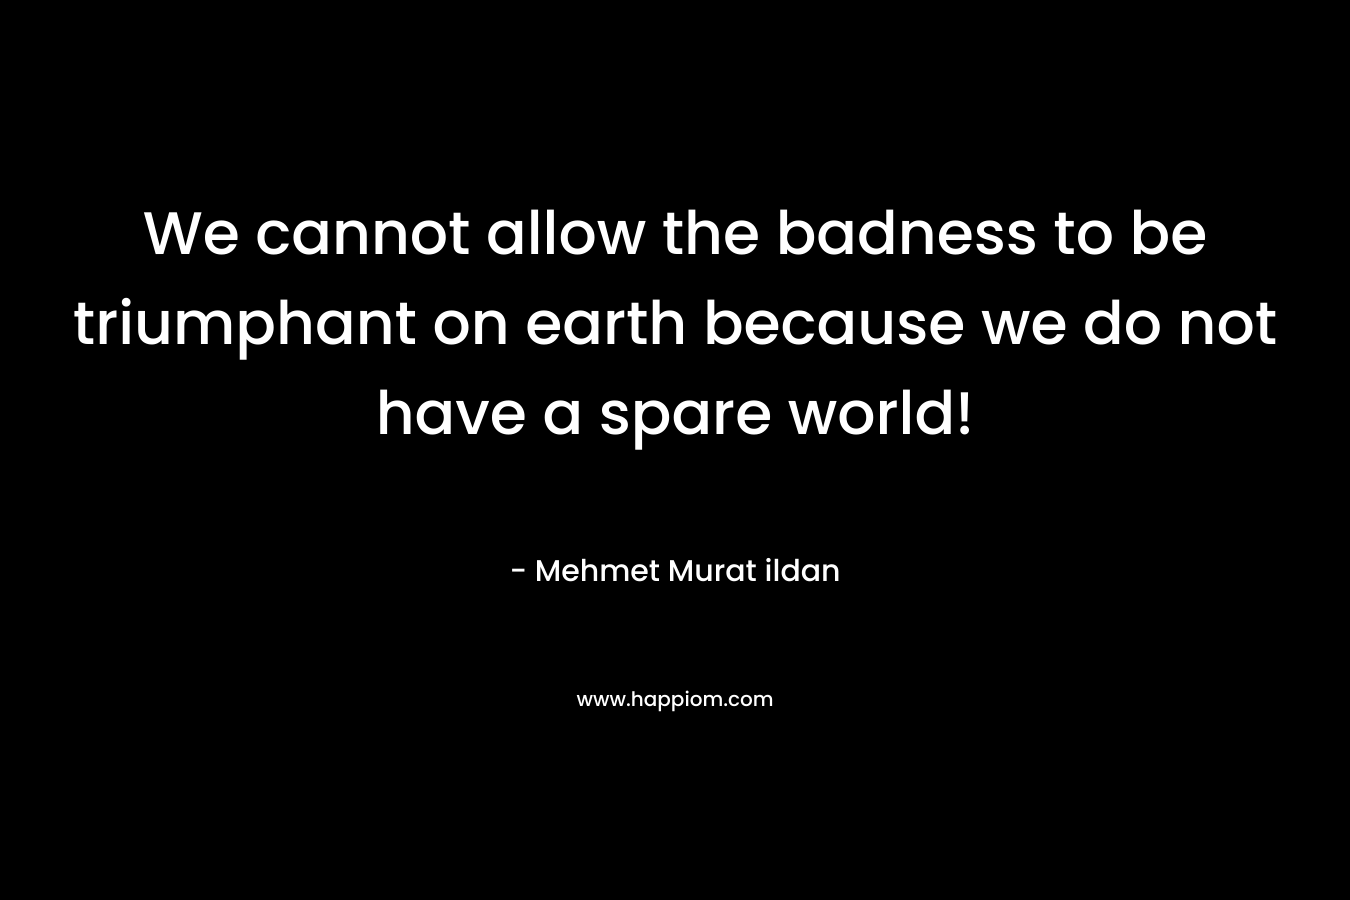 We cannot allow the badness to be triumphant on earth because we do not have a spare world! – Mehmet Murat ildan